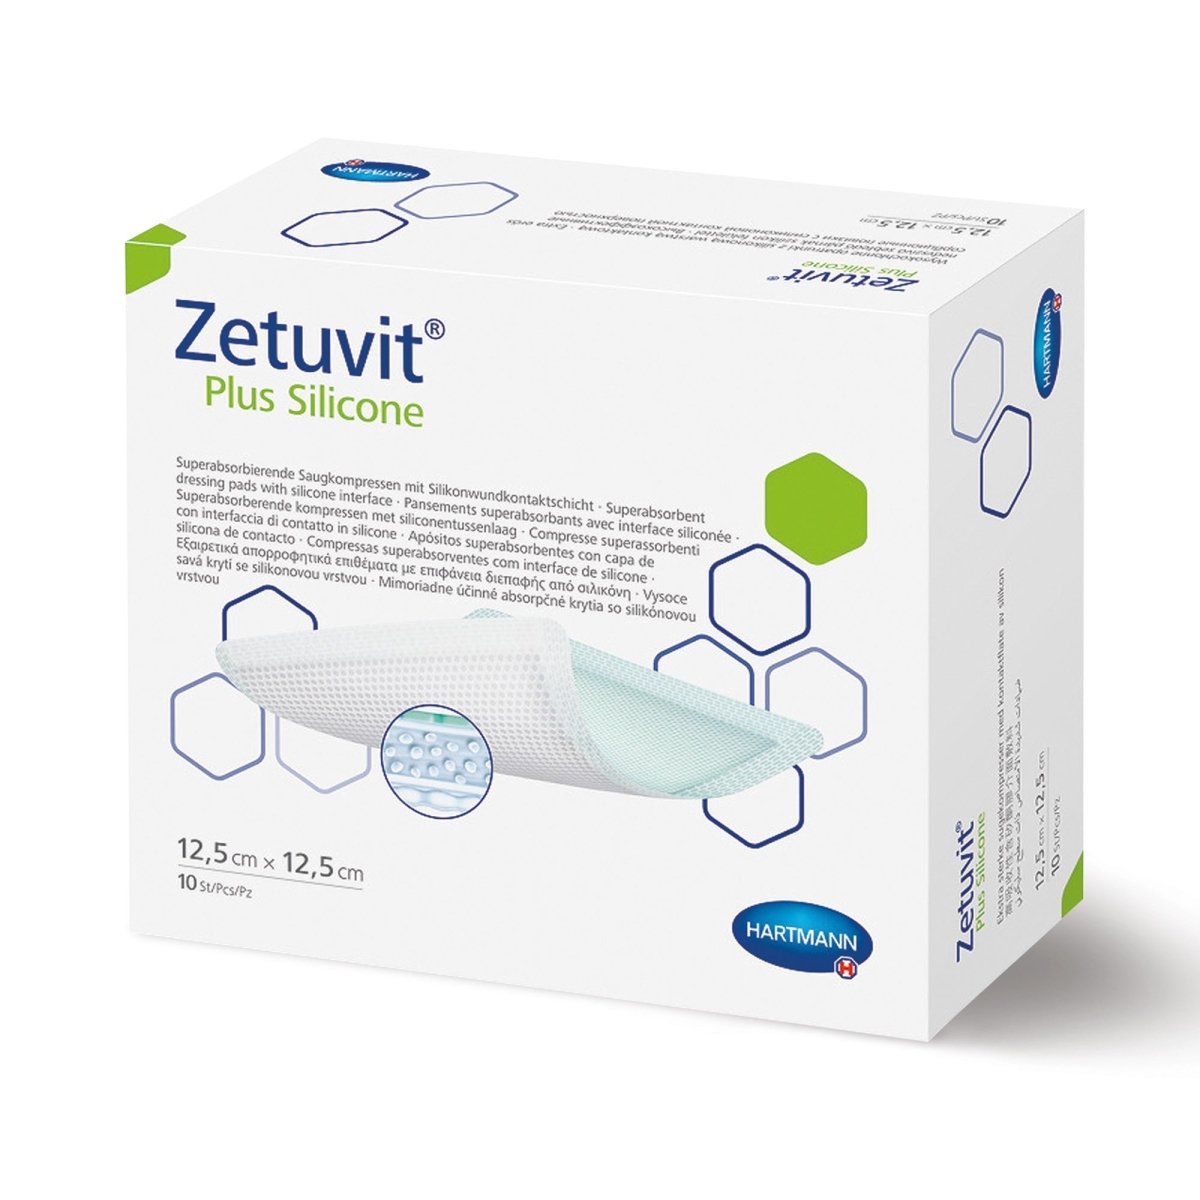 Zetuvit plus silicone ultra absorbent wound care dressings